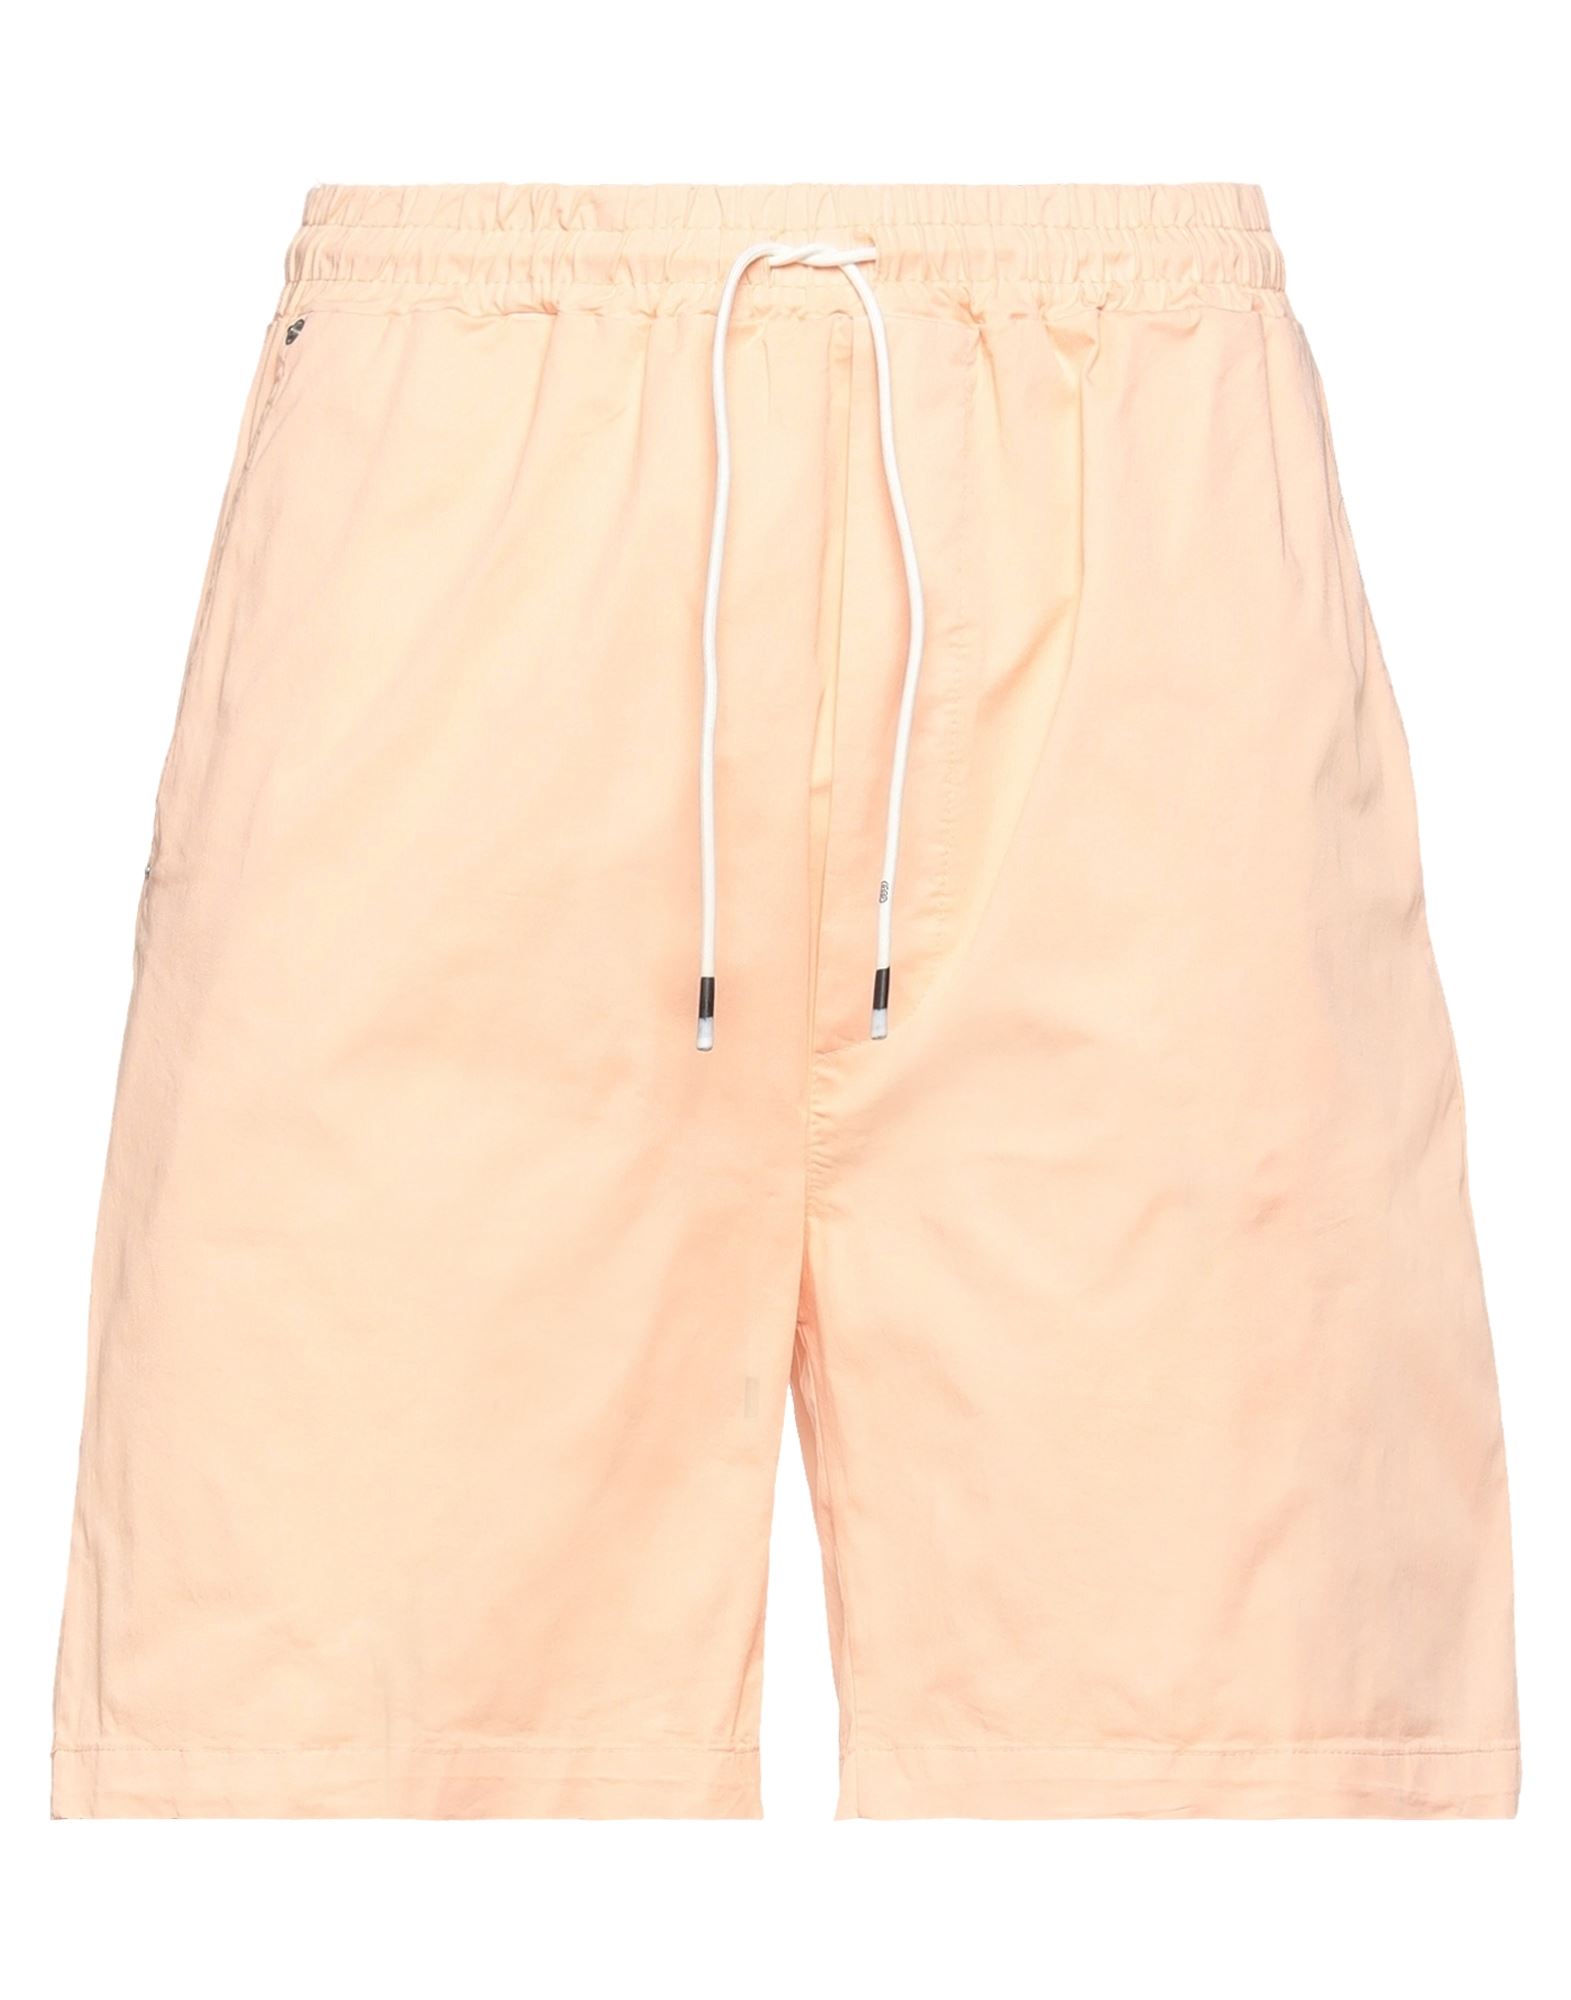 White Over Shorts & Bermuda Shorts In Salmon Pink